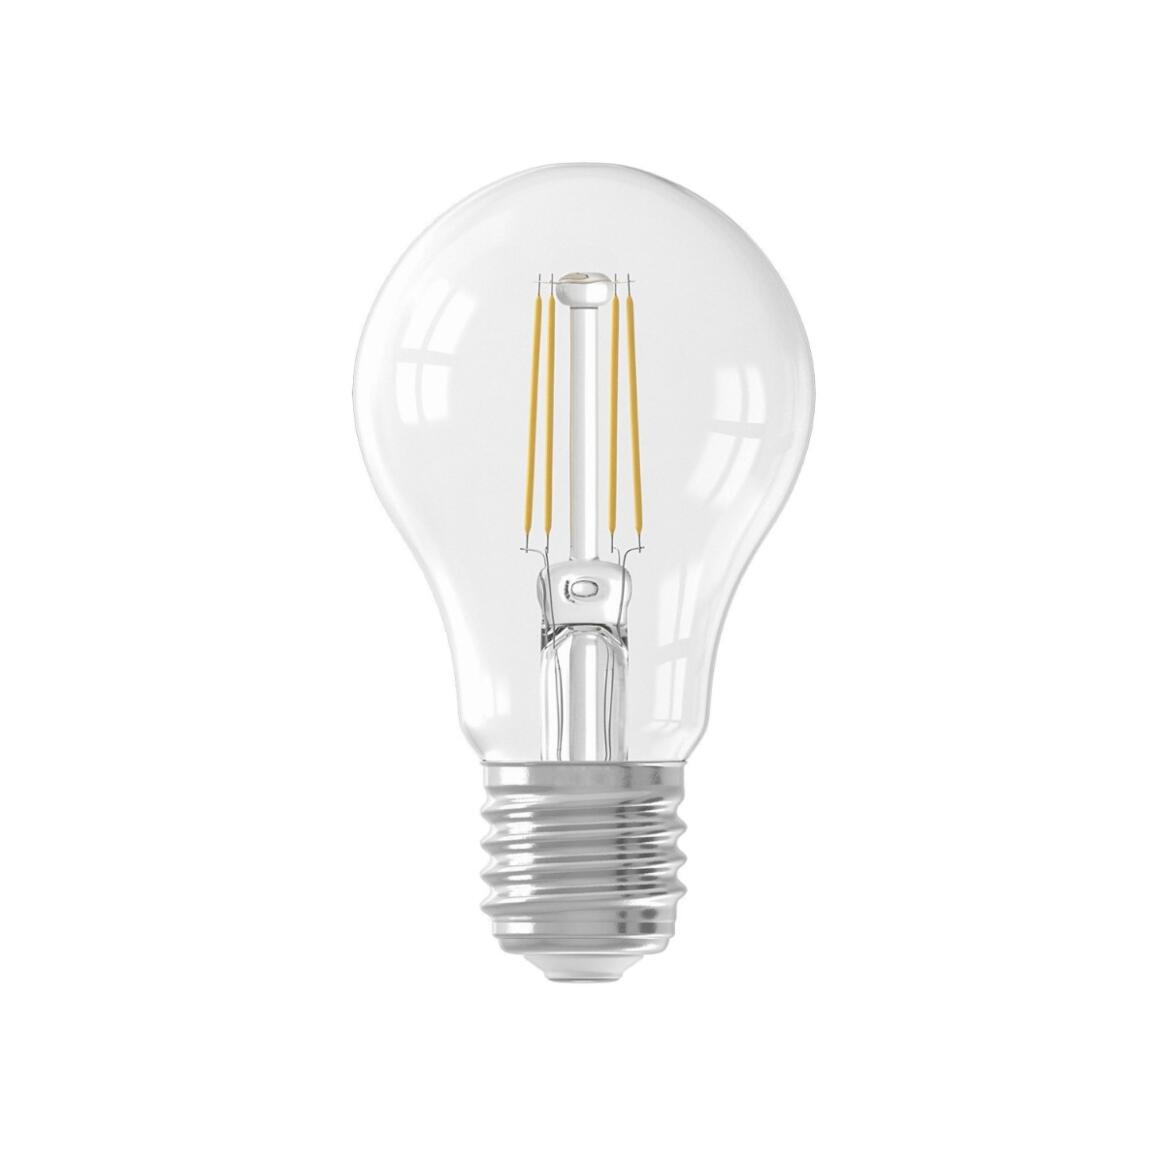 LED GLS Filament Bulb Dimmable E27 4W 2700k 350lm 6cm main product image